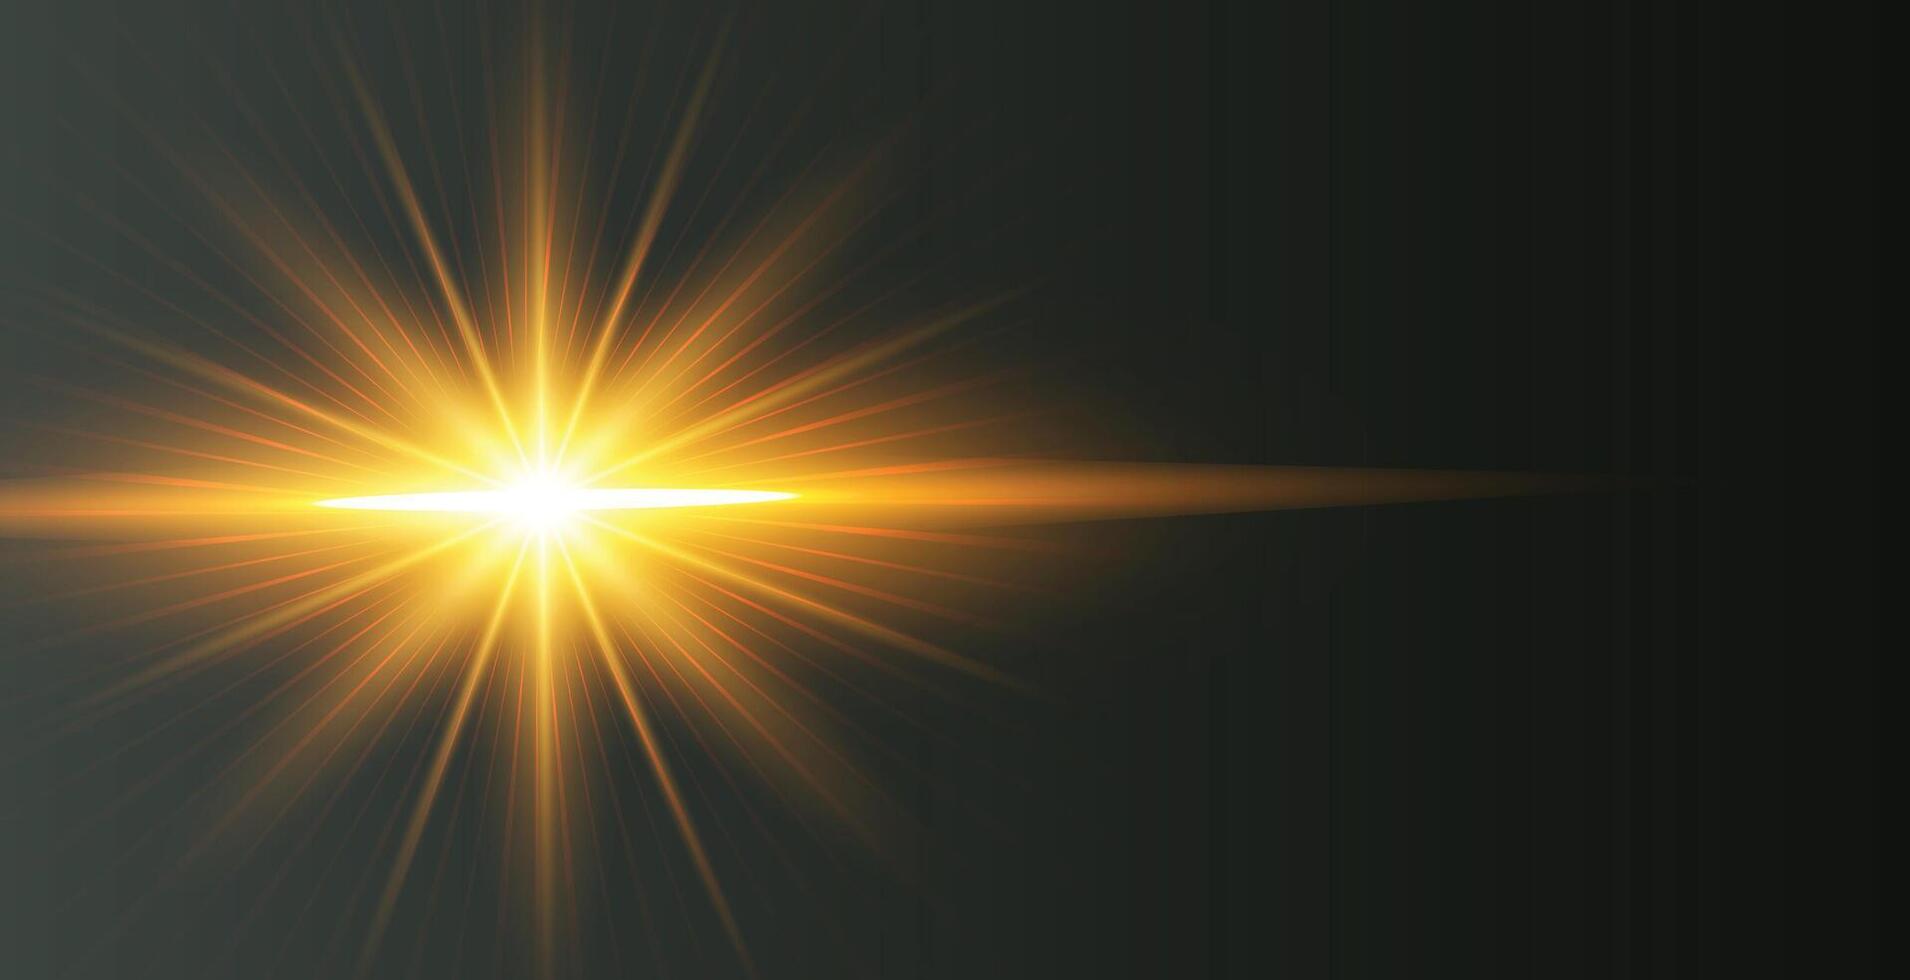 abstract and shiny solar radiance dark background with light effect vector